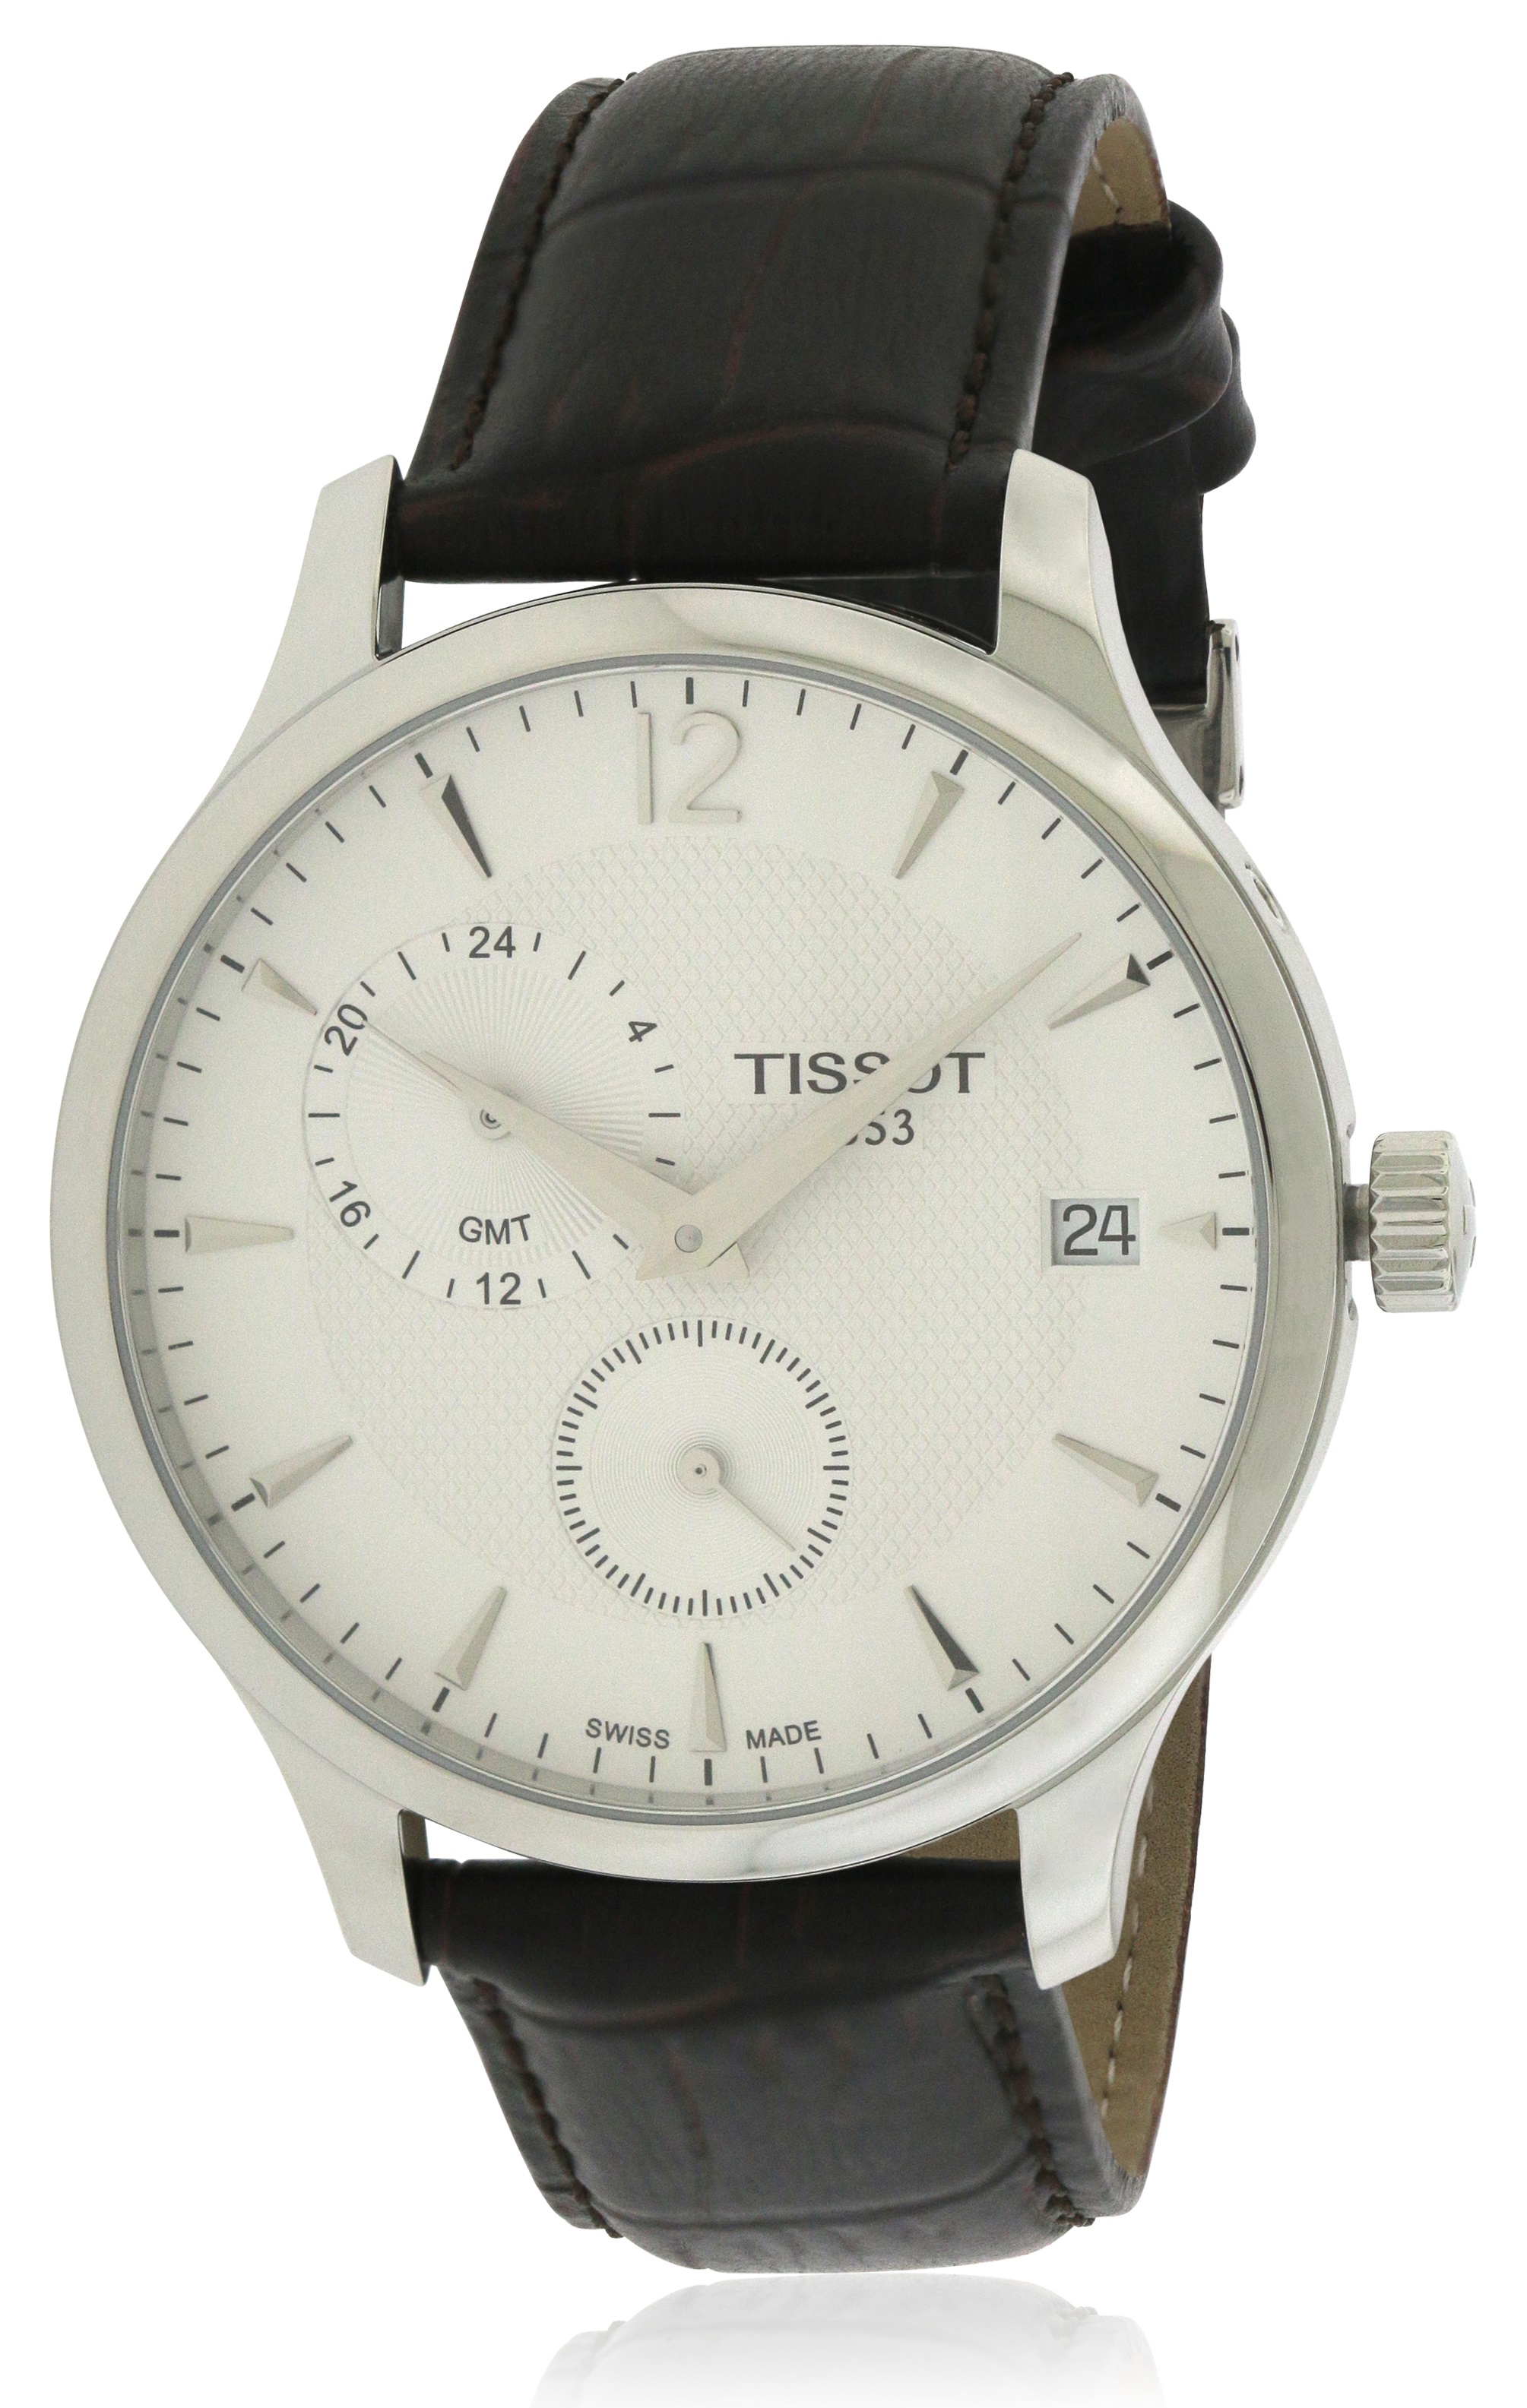 Tissot Tradition GMT Leather Mens Watch T0636391603700